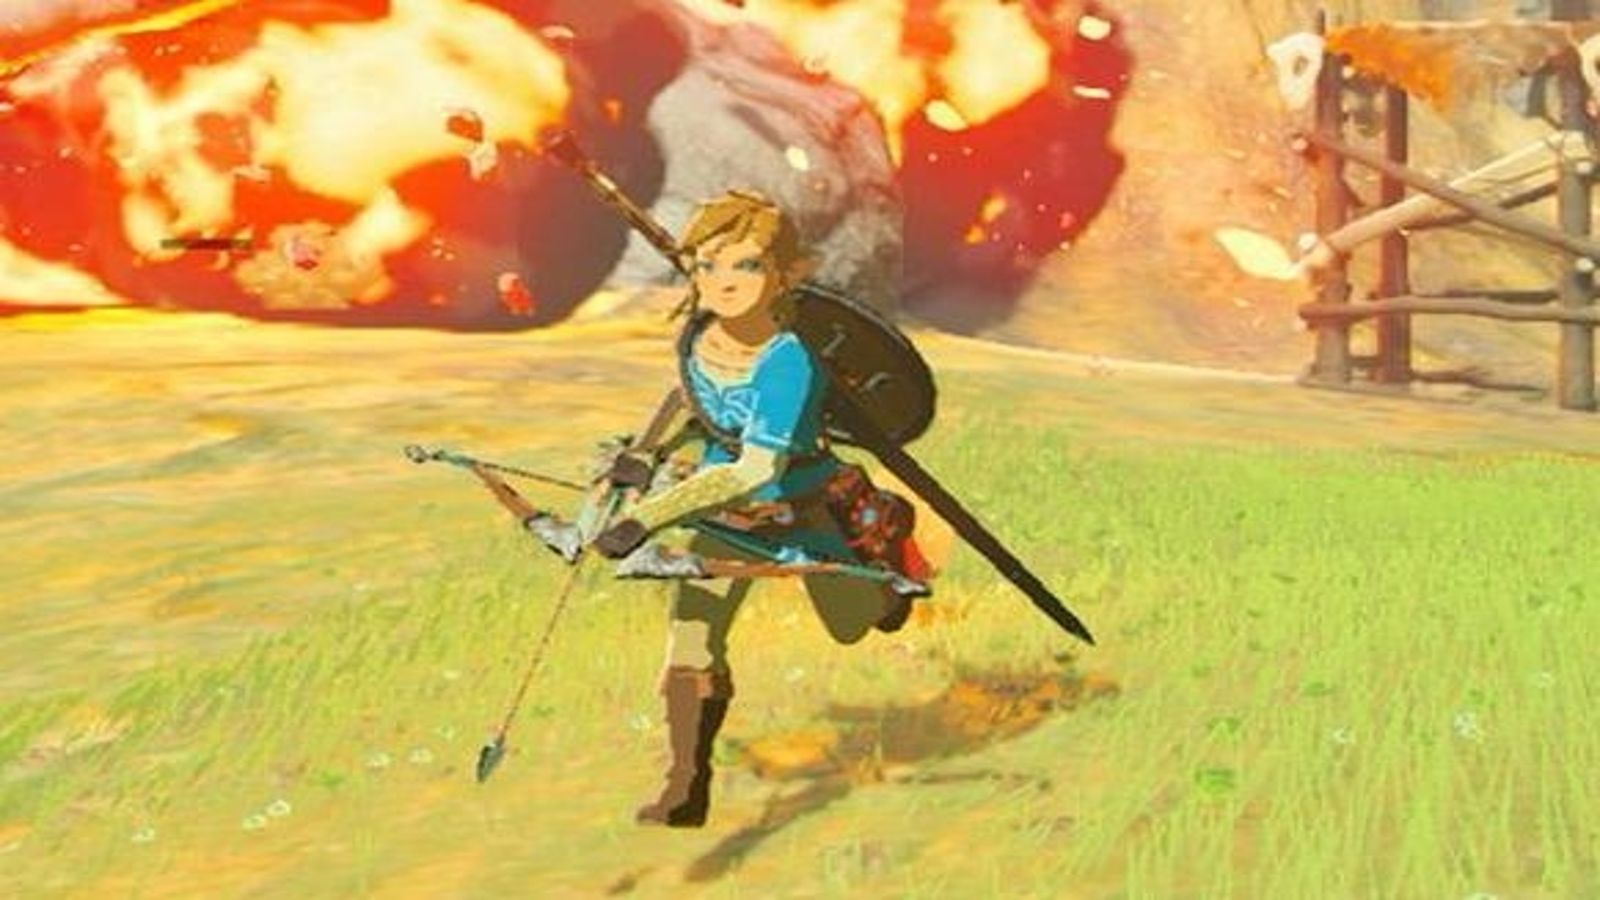 Fan project to get Zelda: Breath of the Wild running on PC shows remarkable  progress